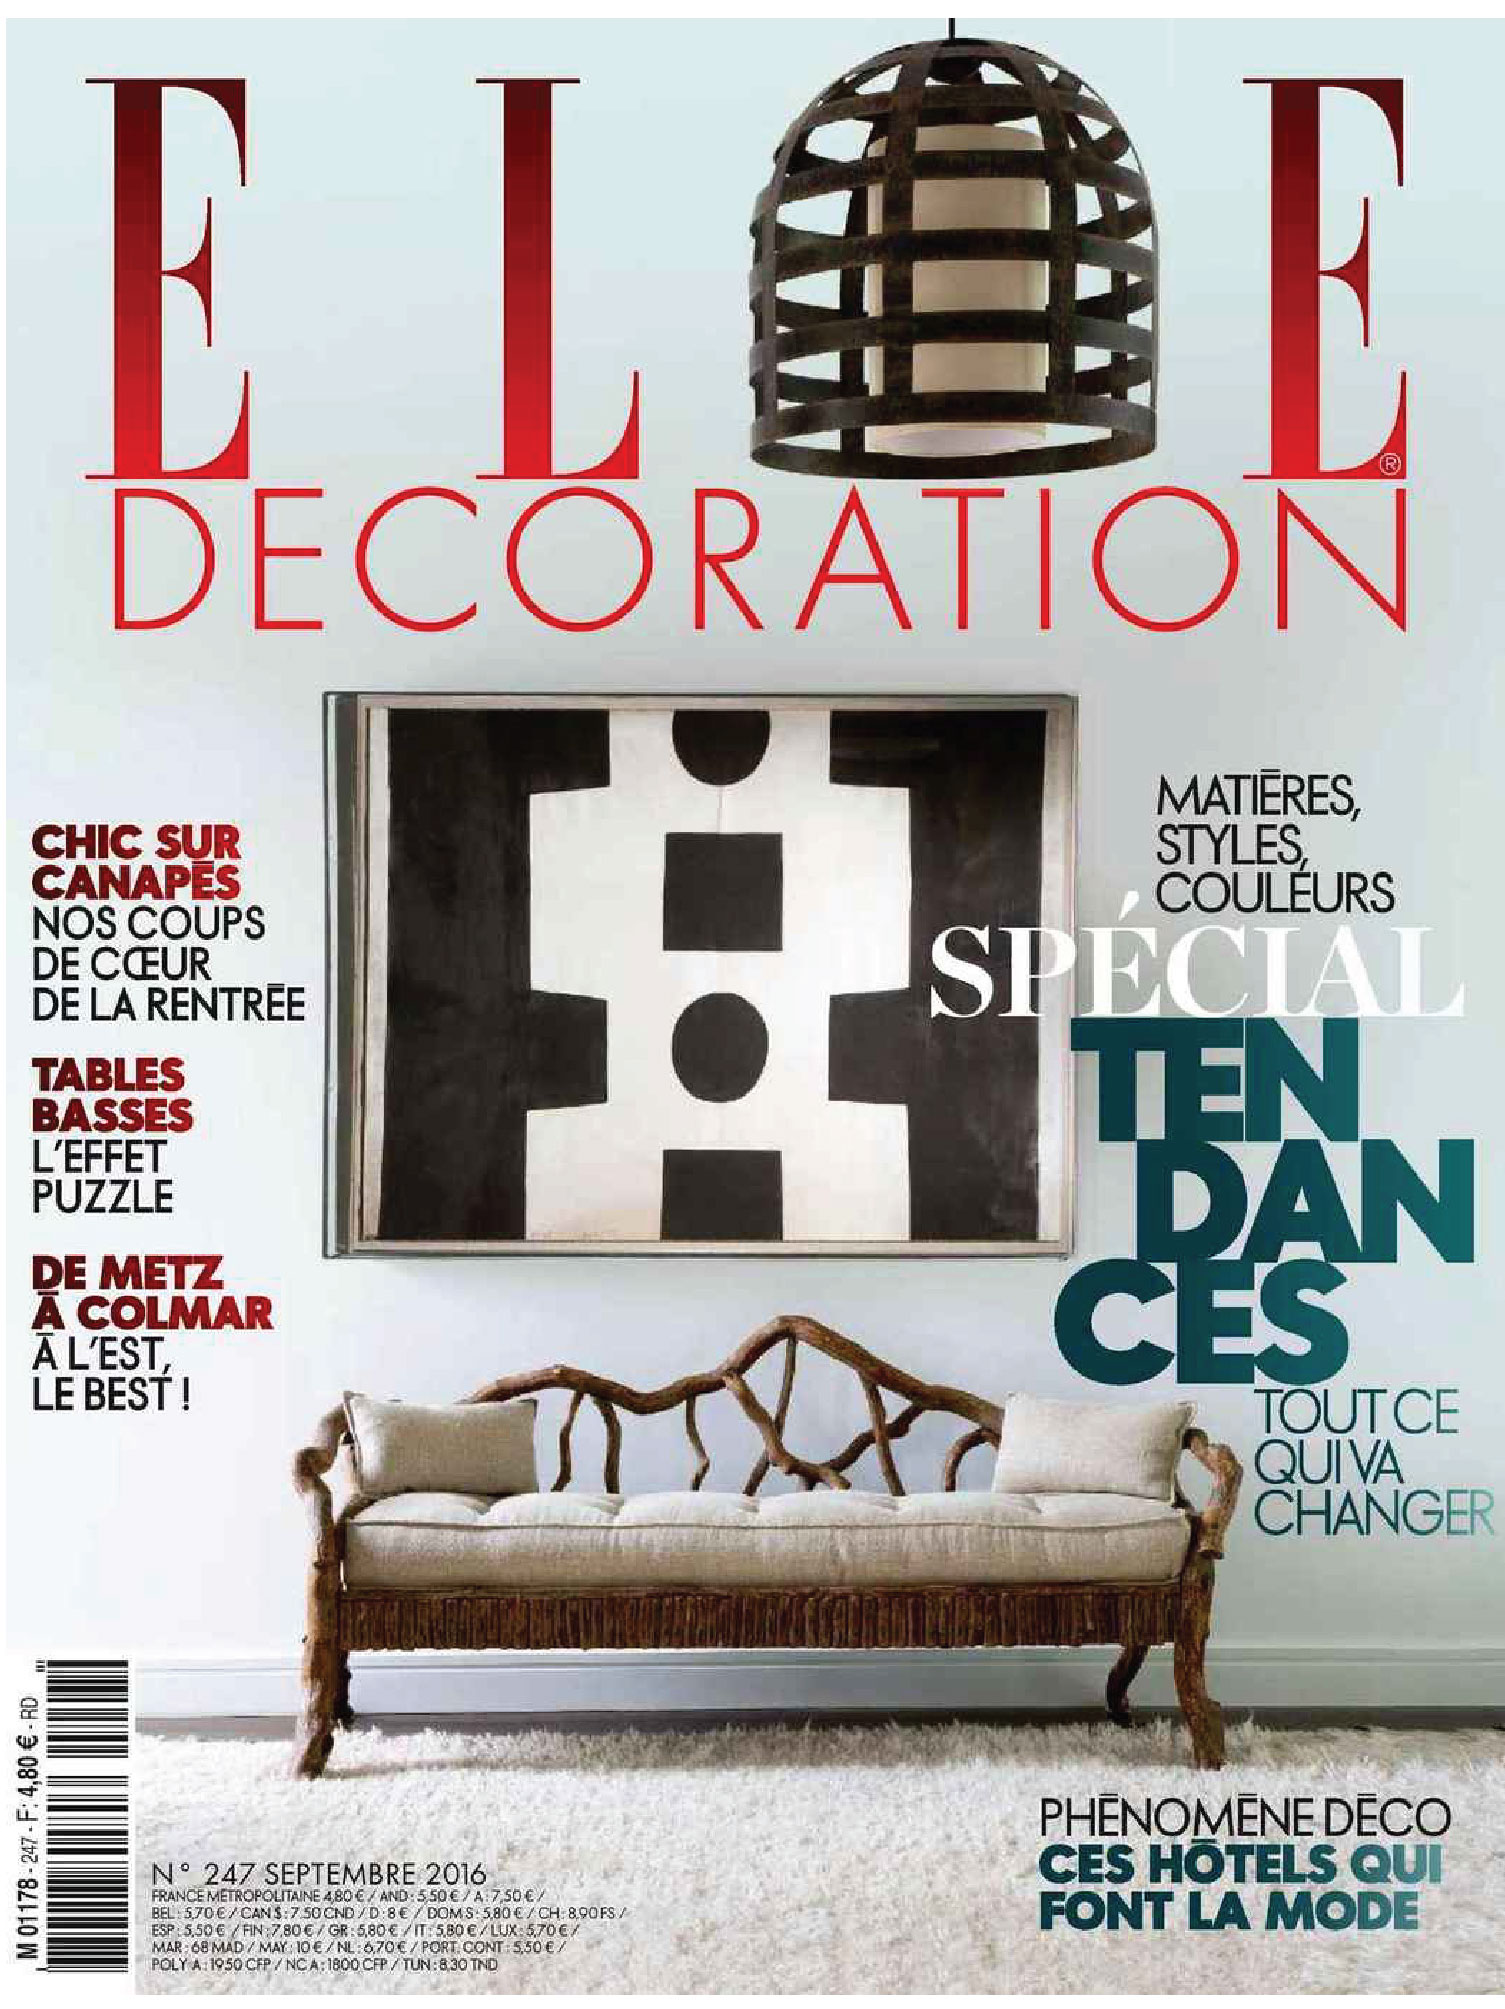 cover of the magazine elle decoration august 2016